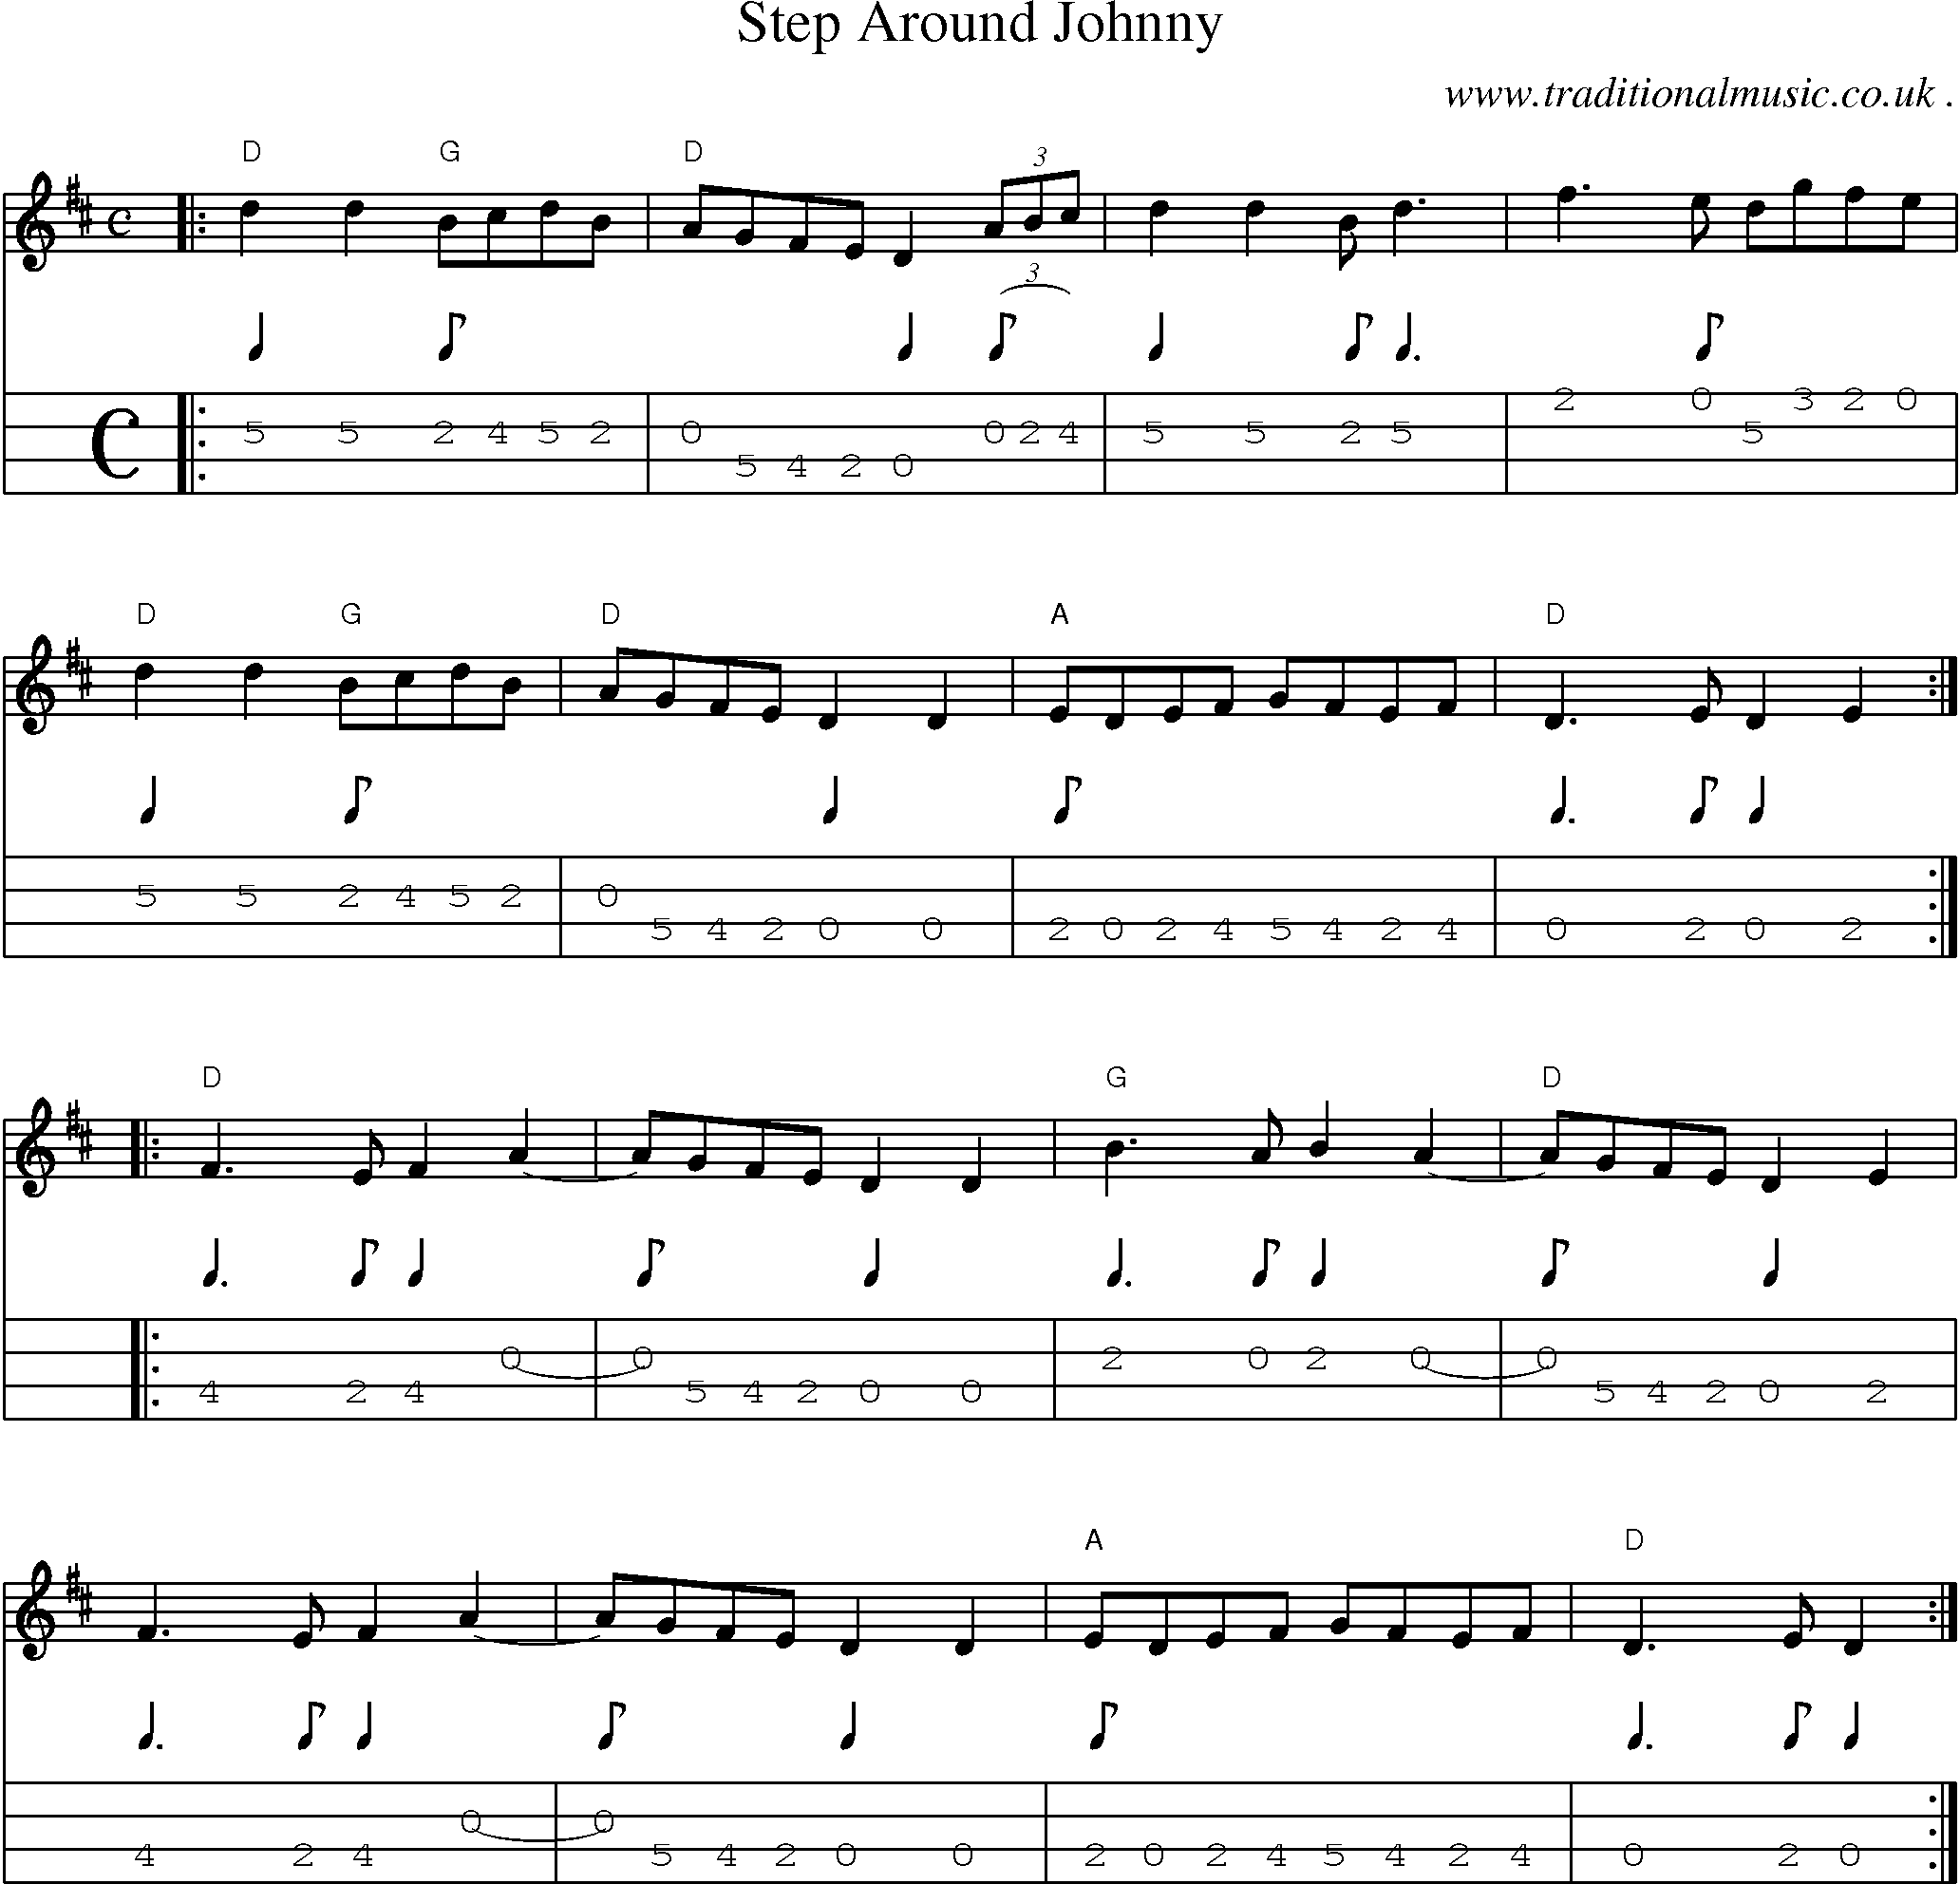 Music Score and Mandolin Tabs for Step Around Johnny